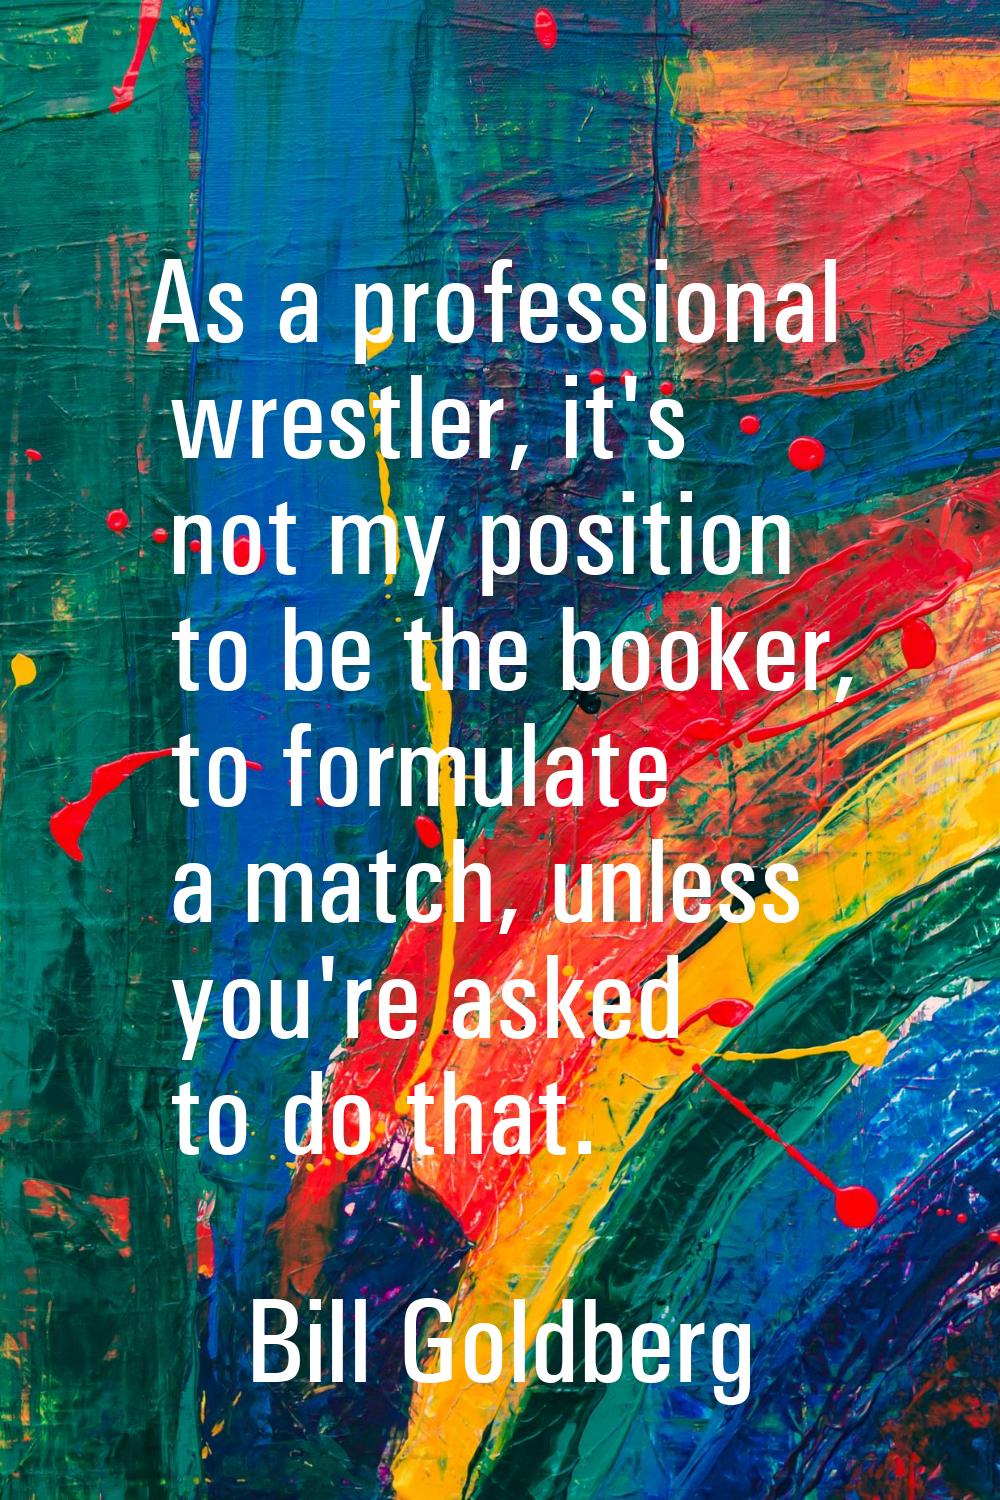 As a professional wrestler, it's not my position to be the booker, to formulate a match, unless you